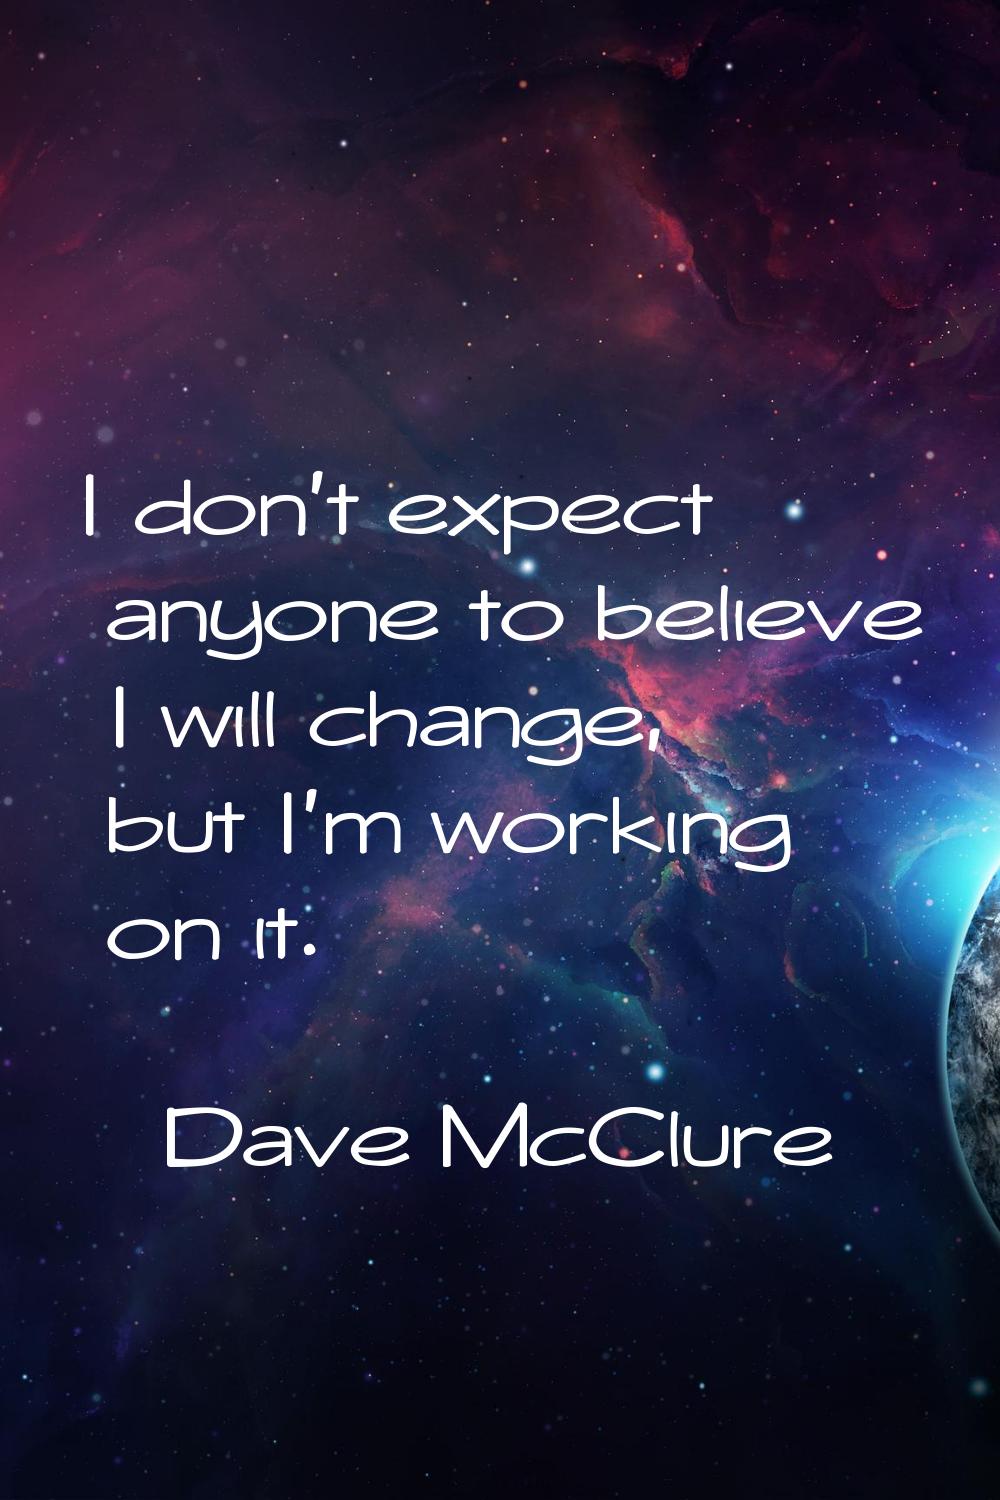 I don't expect anyone to believe I will change, but I'm working on it.